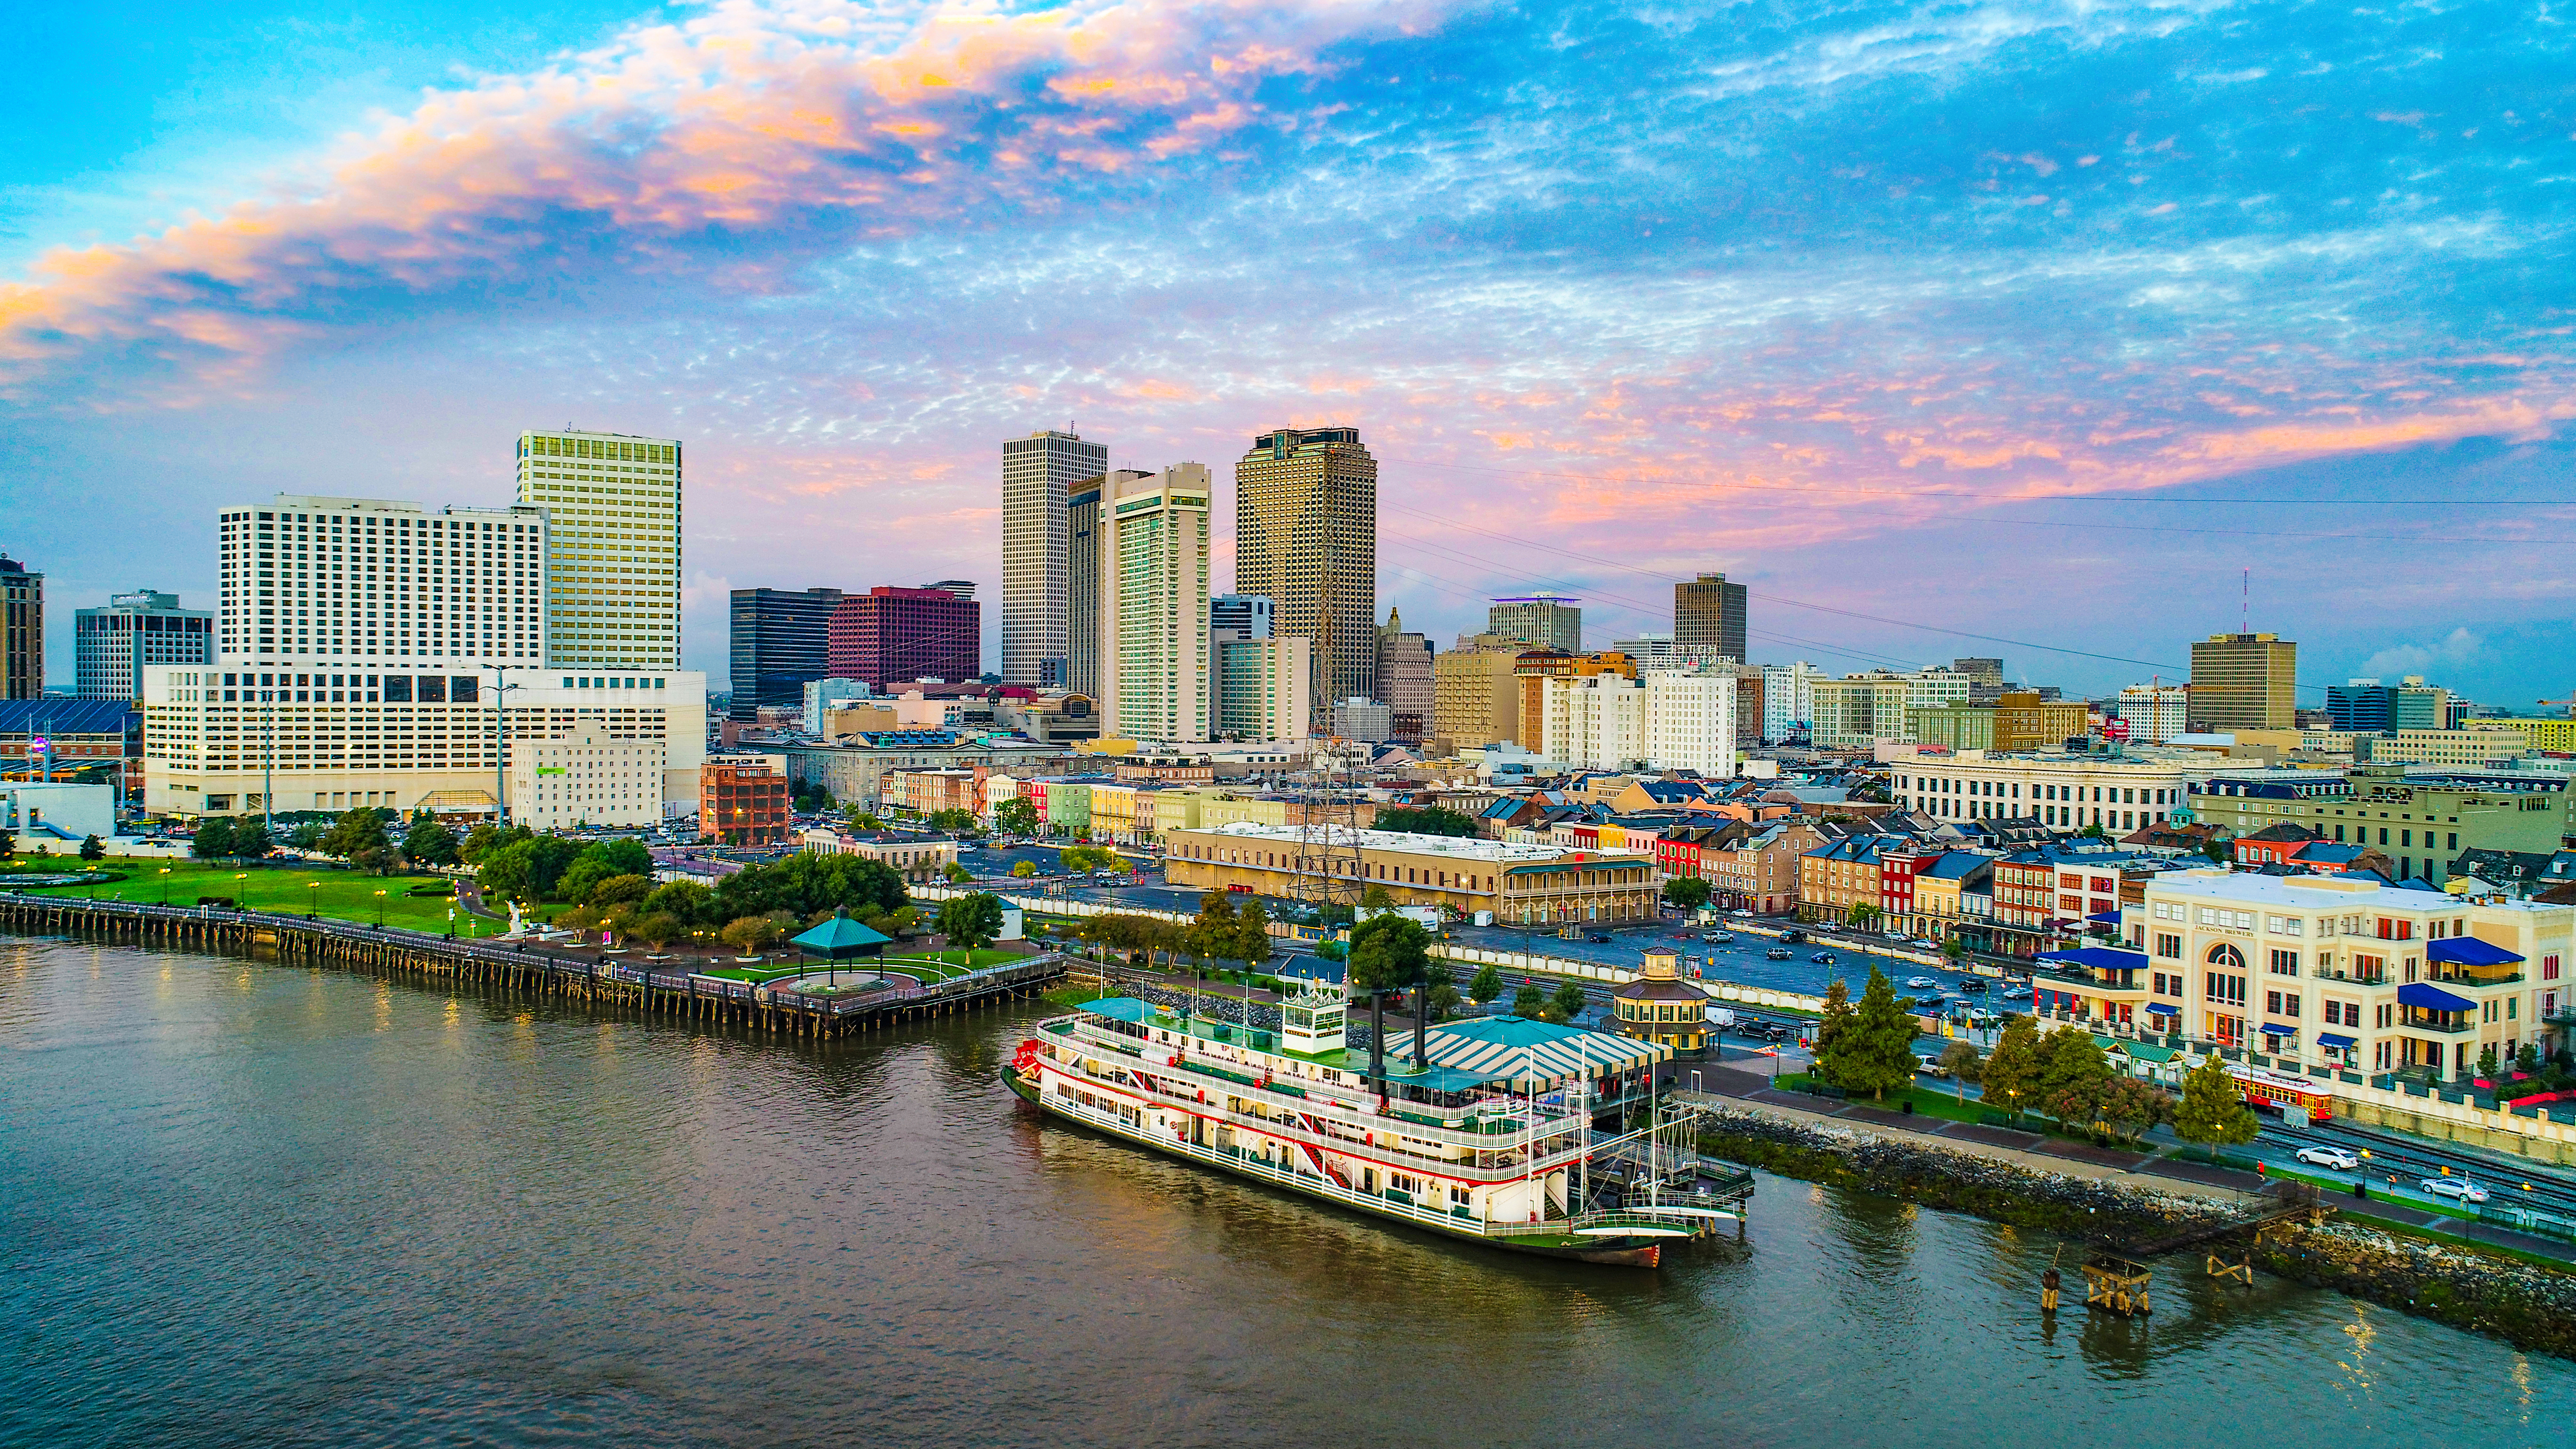 A photograph of New Orleans. The top third is the sky with a light punk sunset across clouds. The middle third is the New Orleans skyline with several skyscrapers and smaller buildings. The lowest third is a river with a large boat in it.